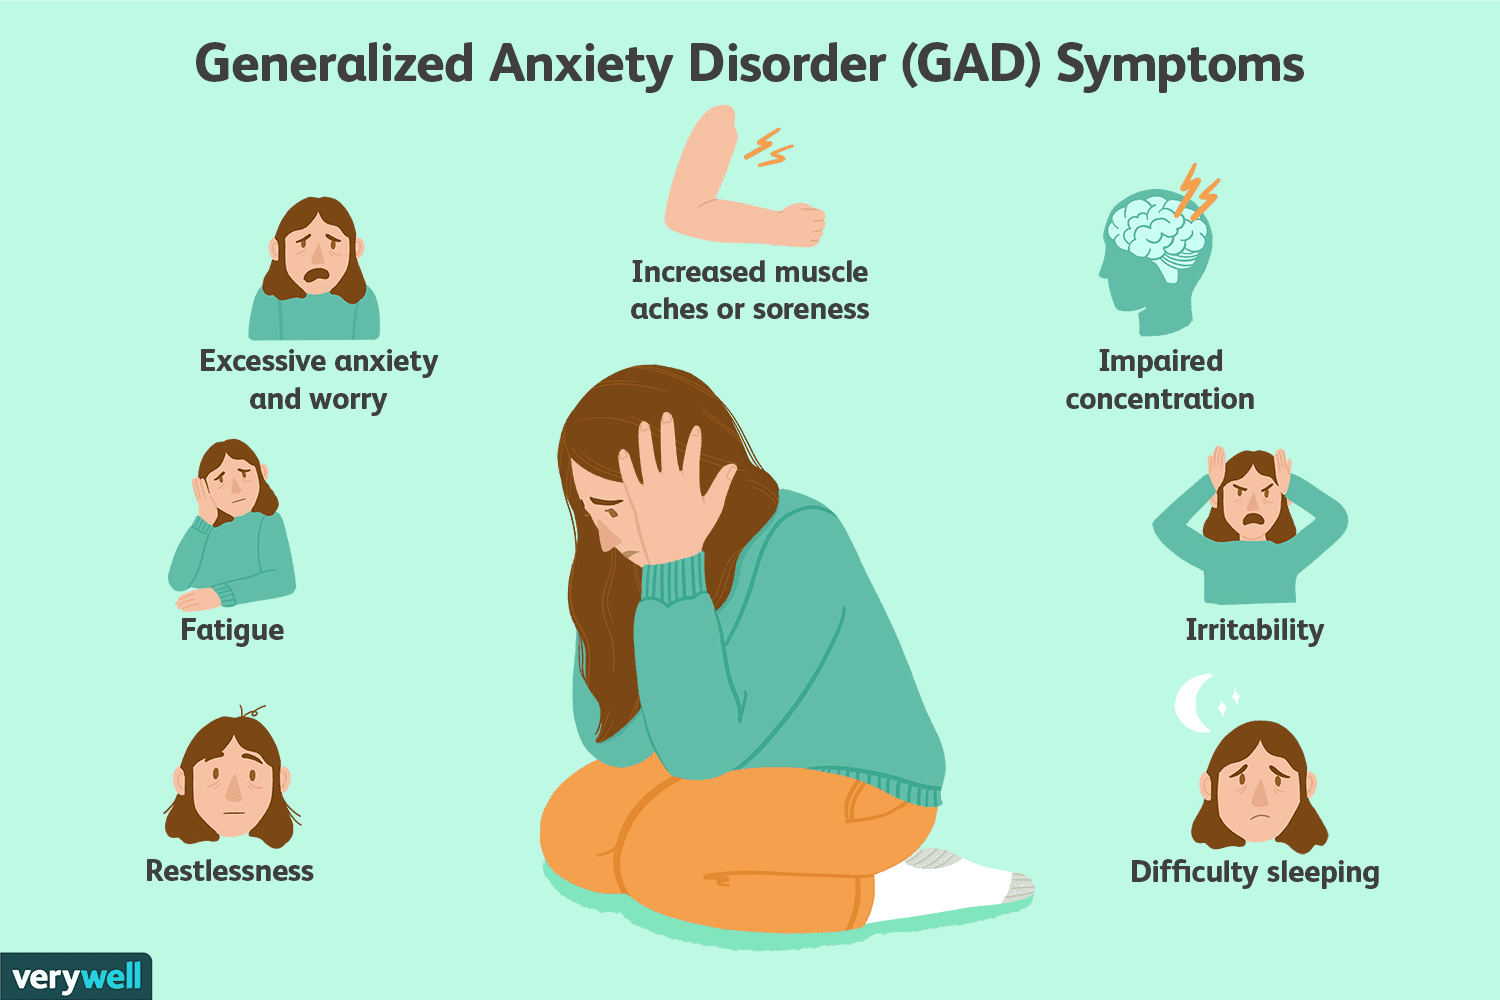 Generalized Anxiety Disorder symptoms chart.